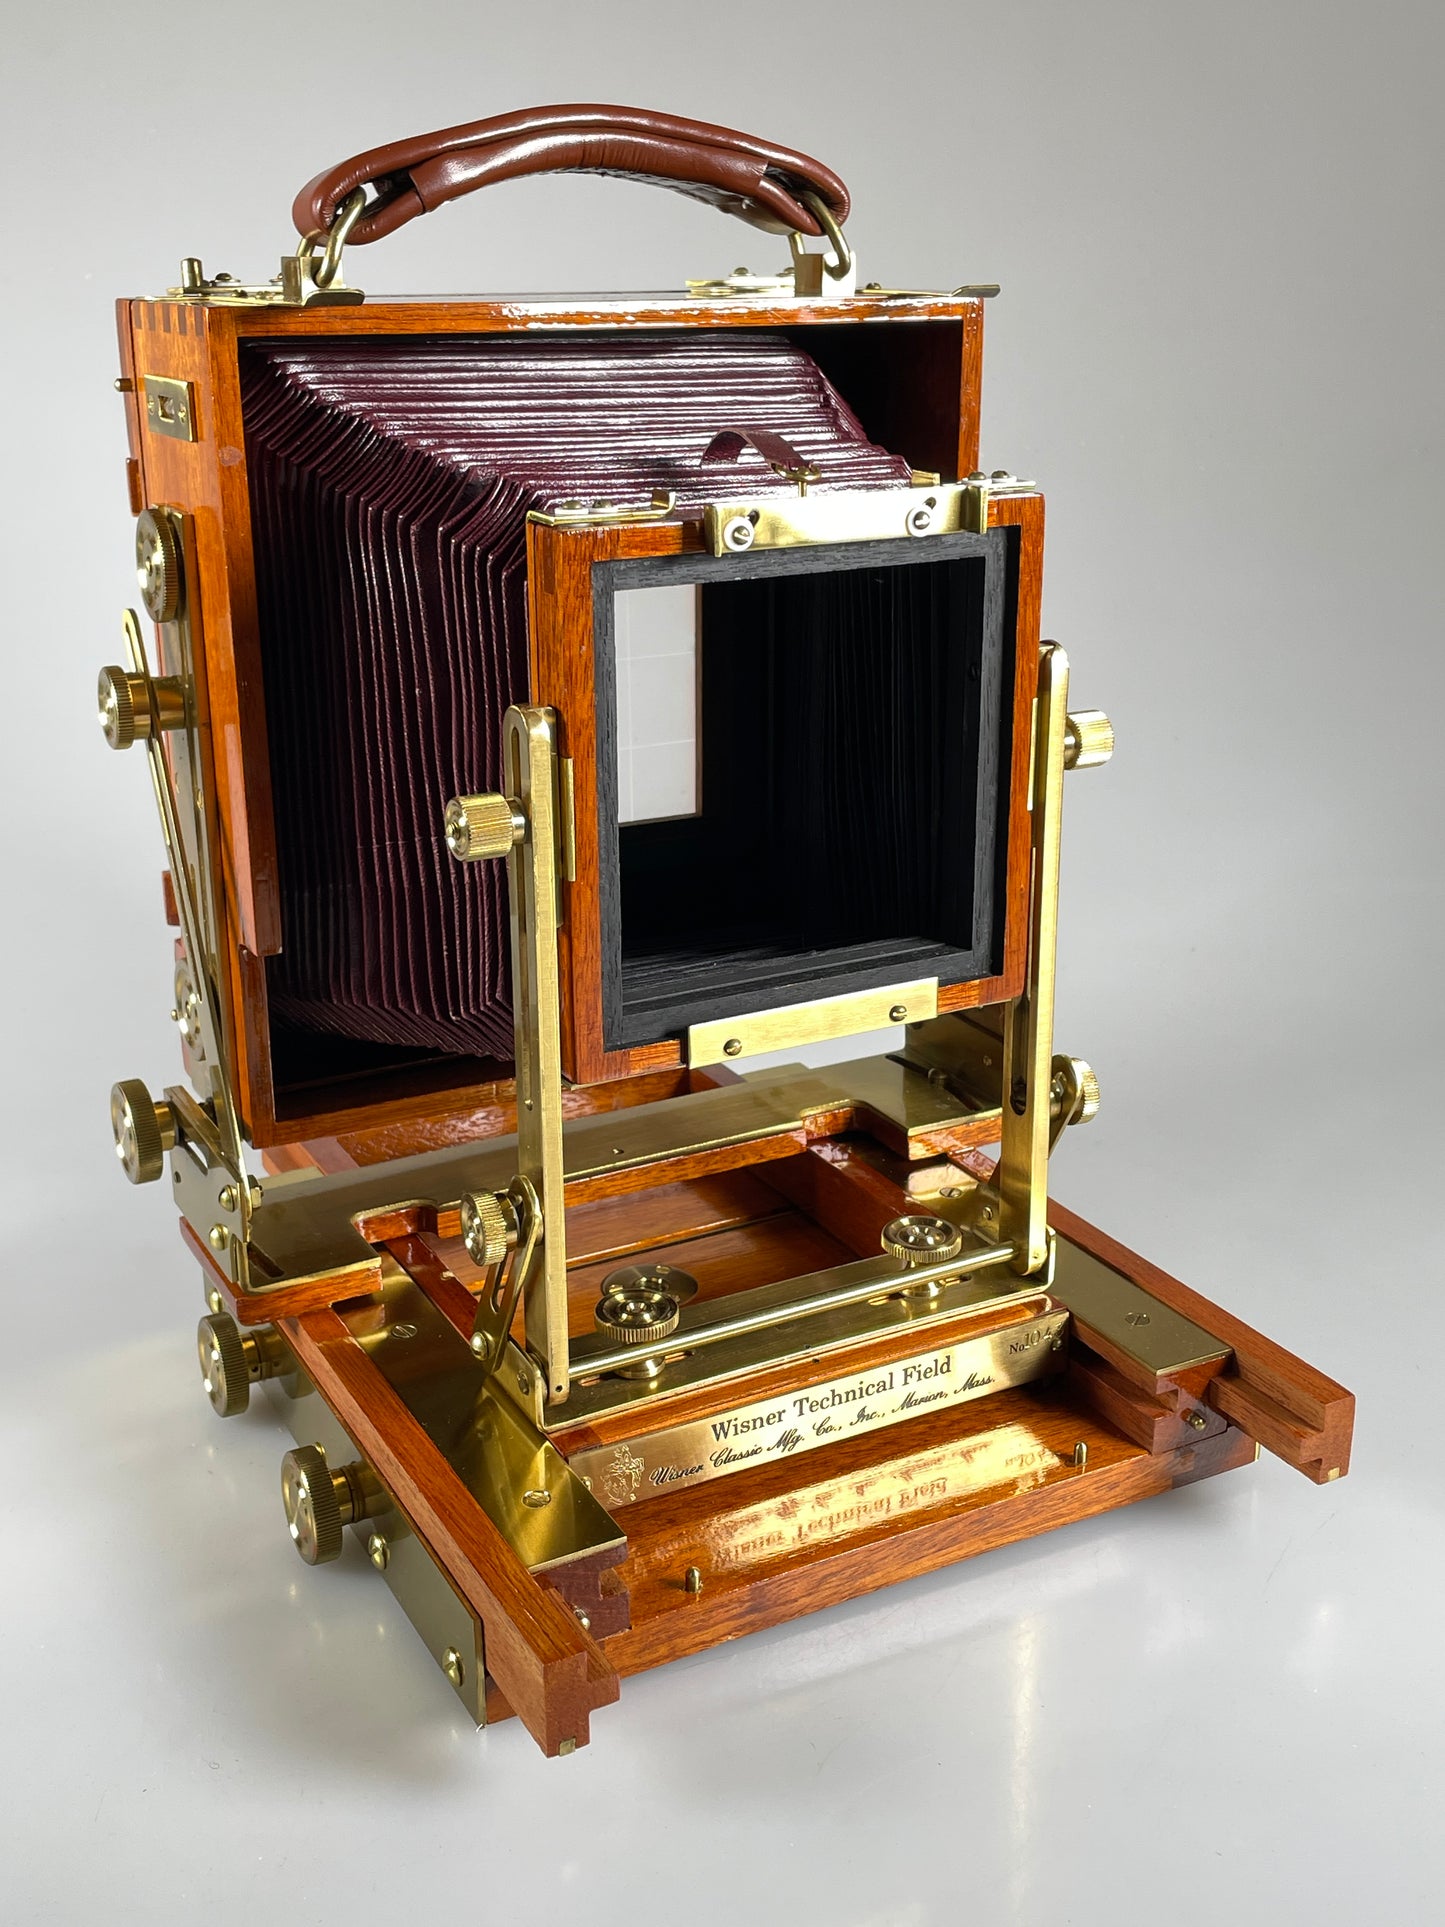 Wisner 4X5 Technical Field Camera large format wooden